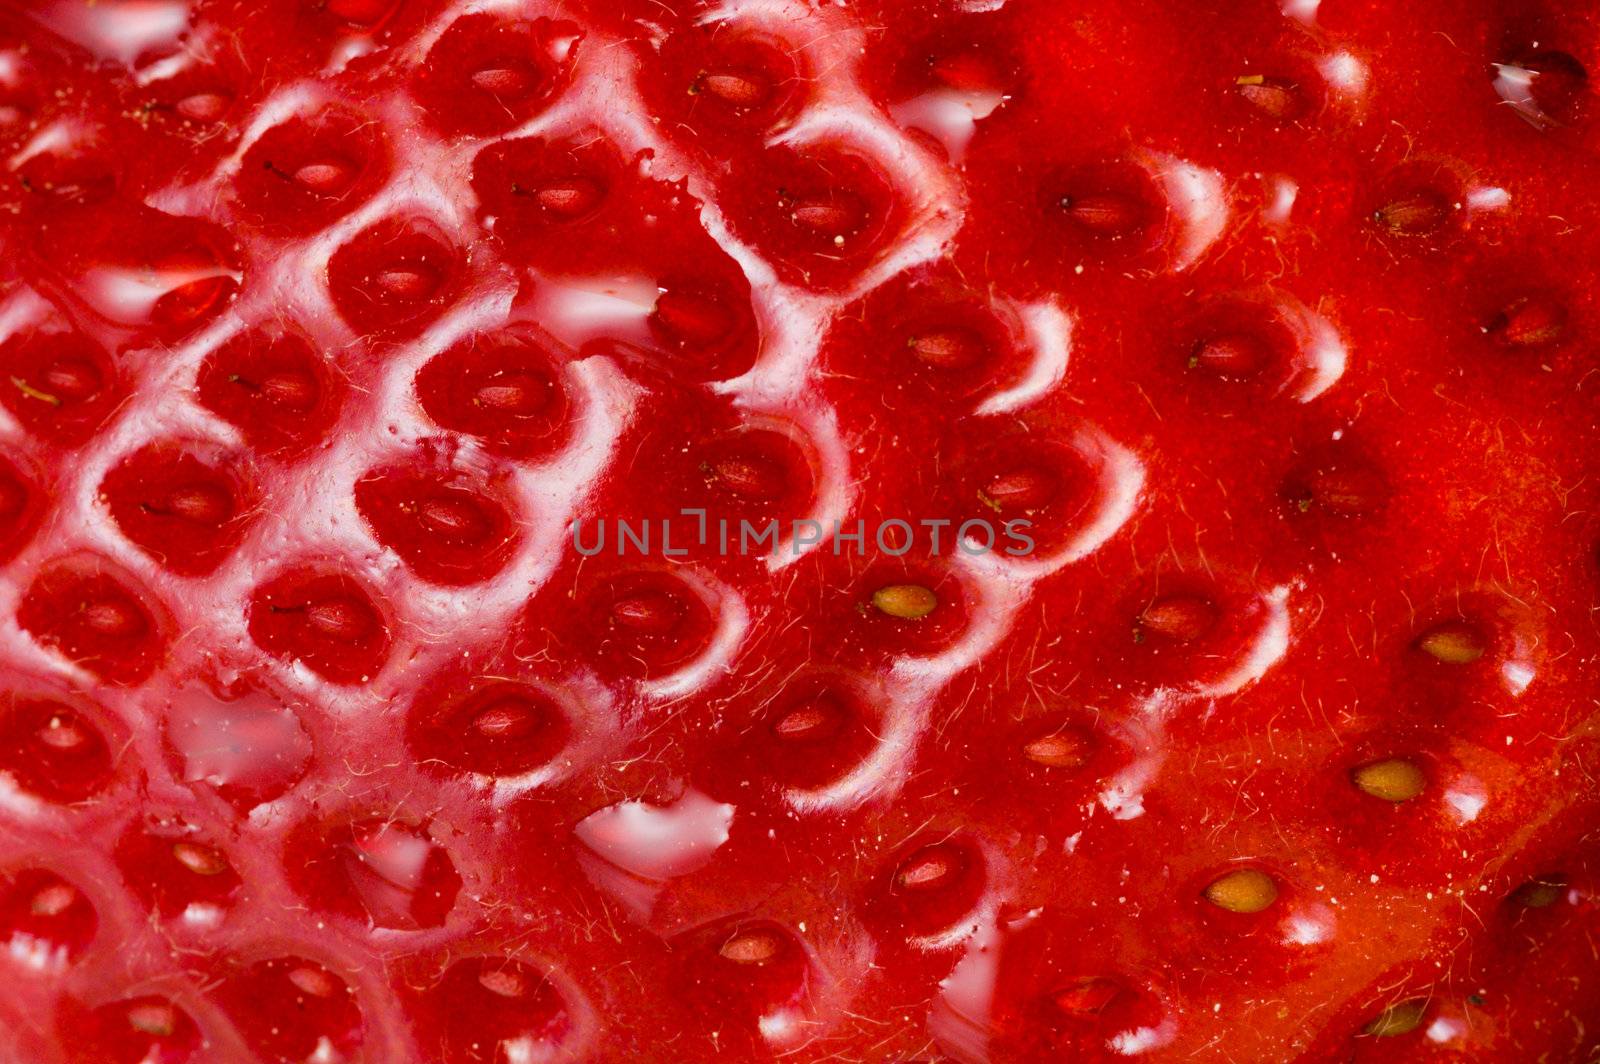 Strawberry texture extreme close up